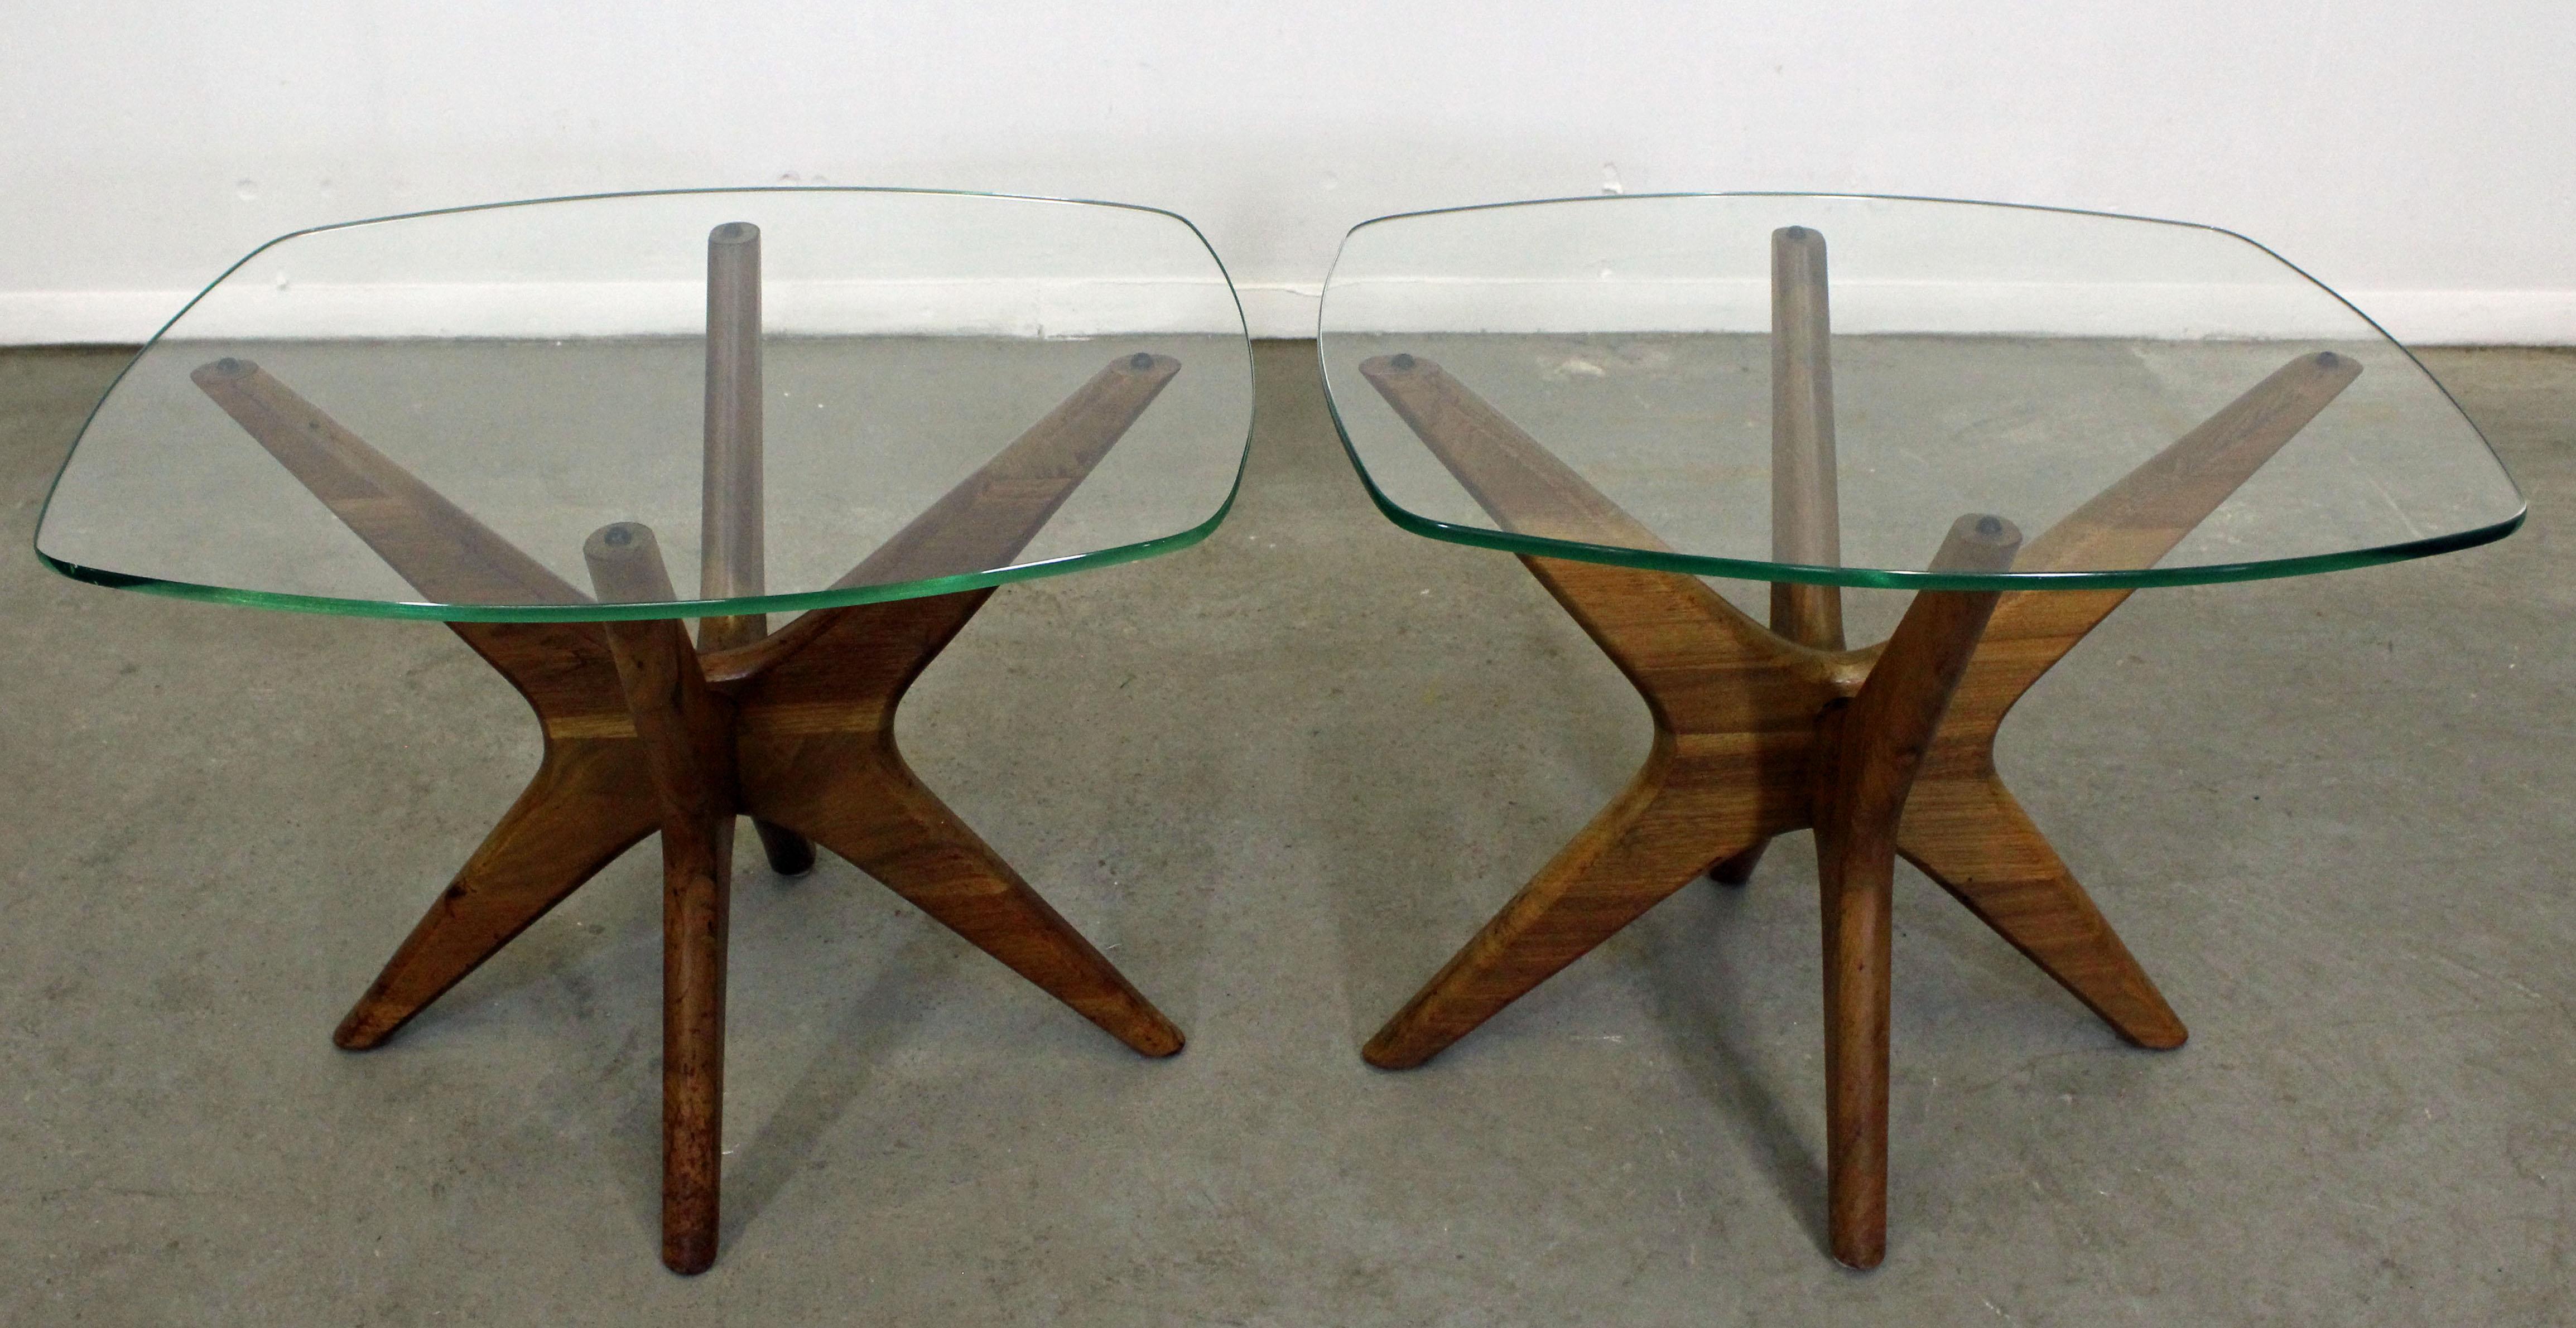 Offered is an authentic pair of Adrian Pearsall 'Jacks' end tables sculpted wooden bases and thick glass tops. In good condition for their age (surface scratches, small chip on one table top, age wear-- see photos). They are not signed. A great